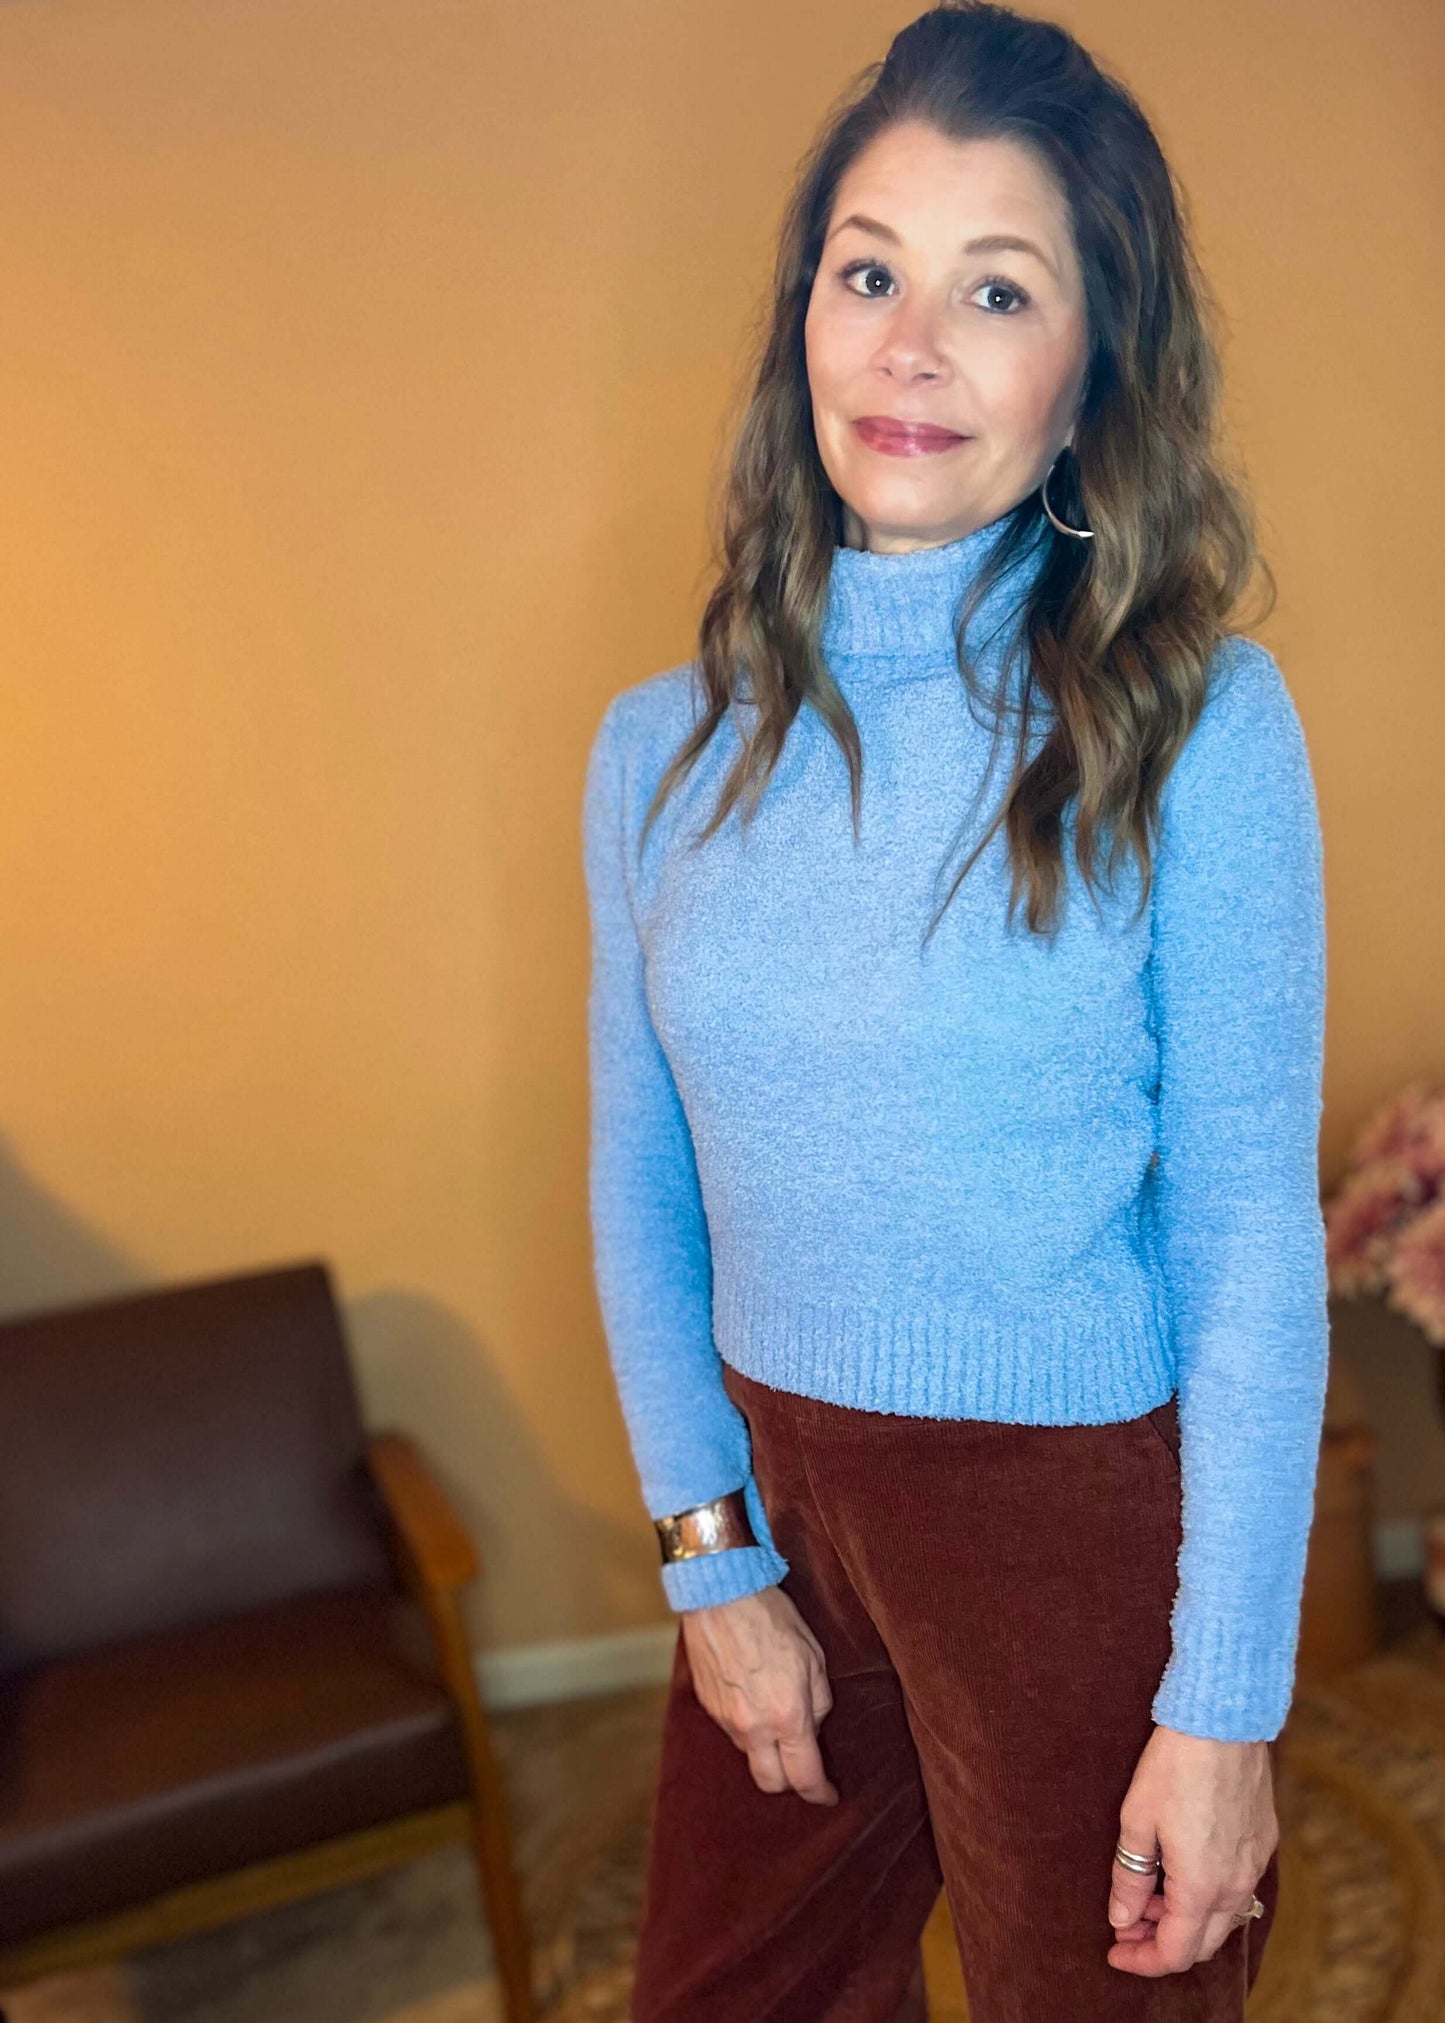 Let it Be Turtleneck Sweater - Light Blue Sweater clothing, flattering fit, fluffy sweater, long sleeve turtleneck sweater, ribbed cuff, ribbed hem, ribbedd neck, shirts & tops